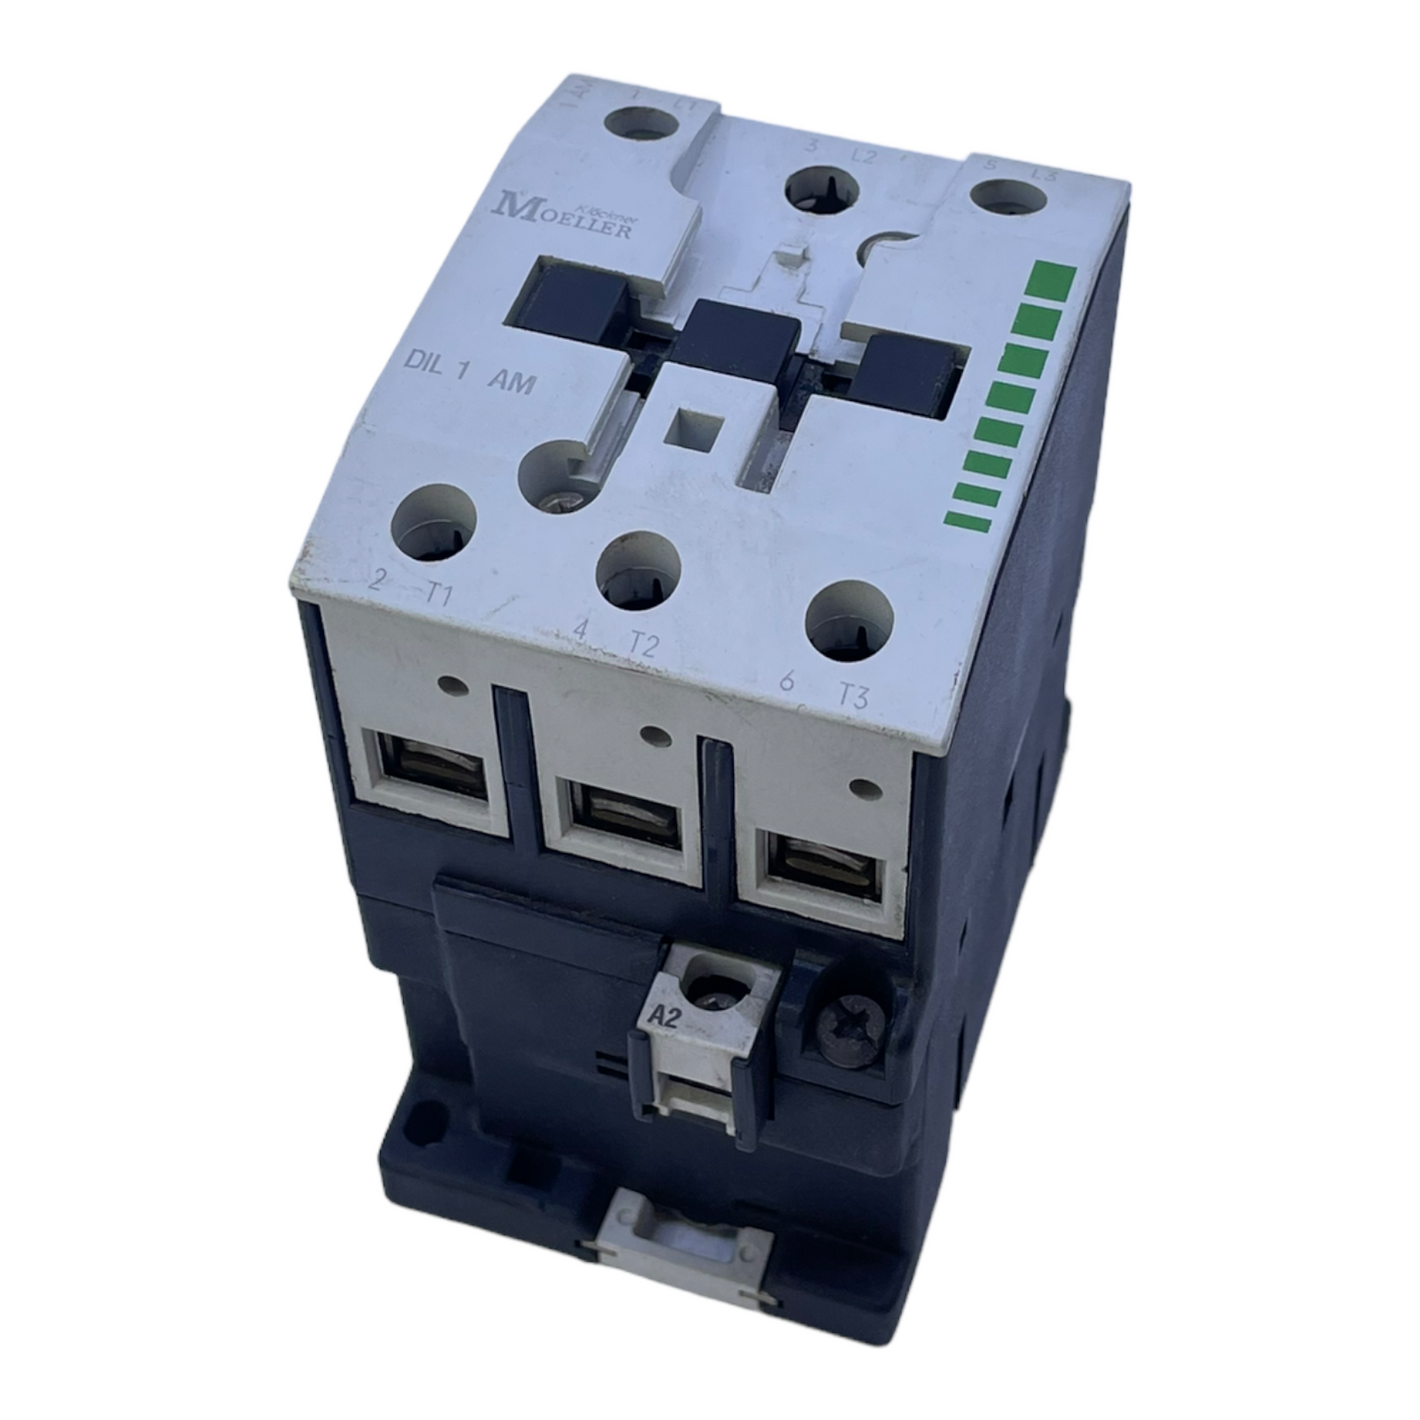 Moeller DIL1AM circuit breaker for industrial use protection switch 230V